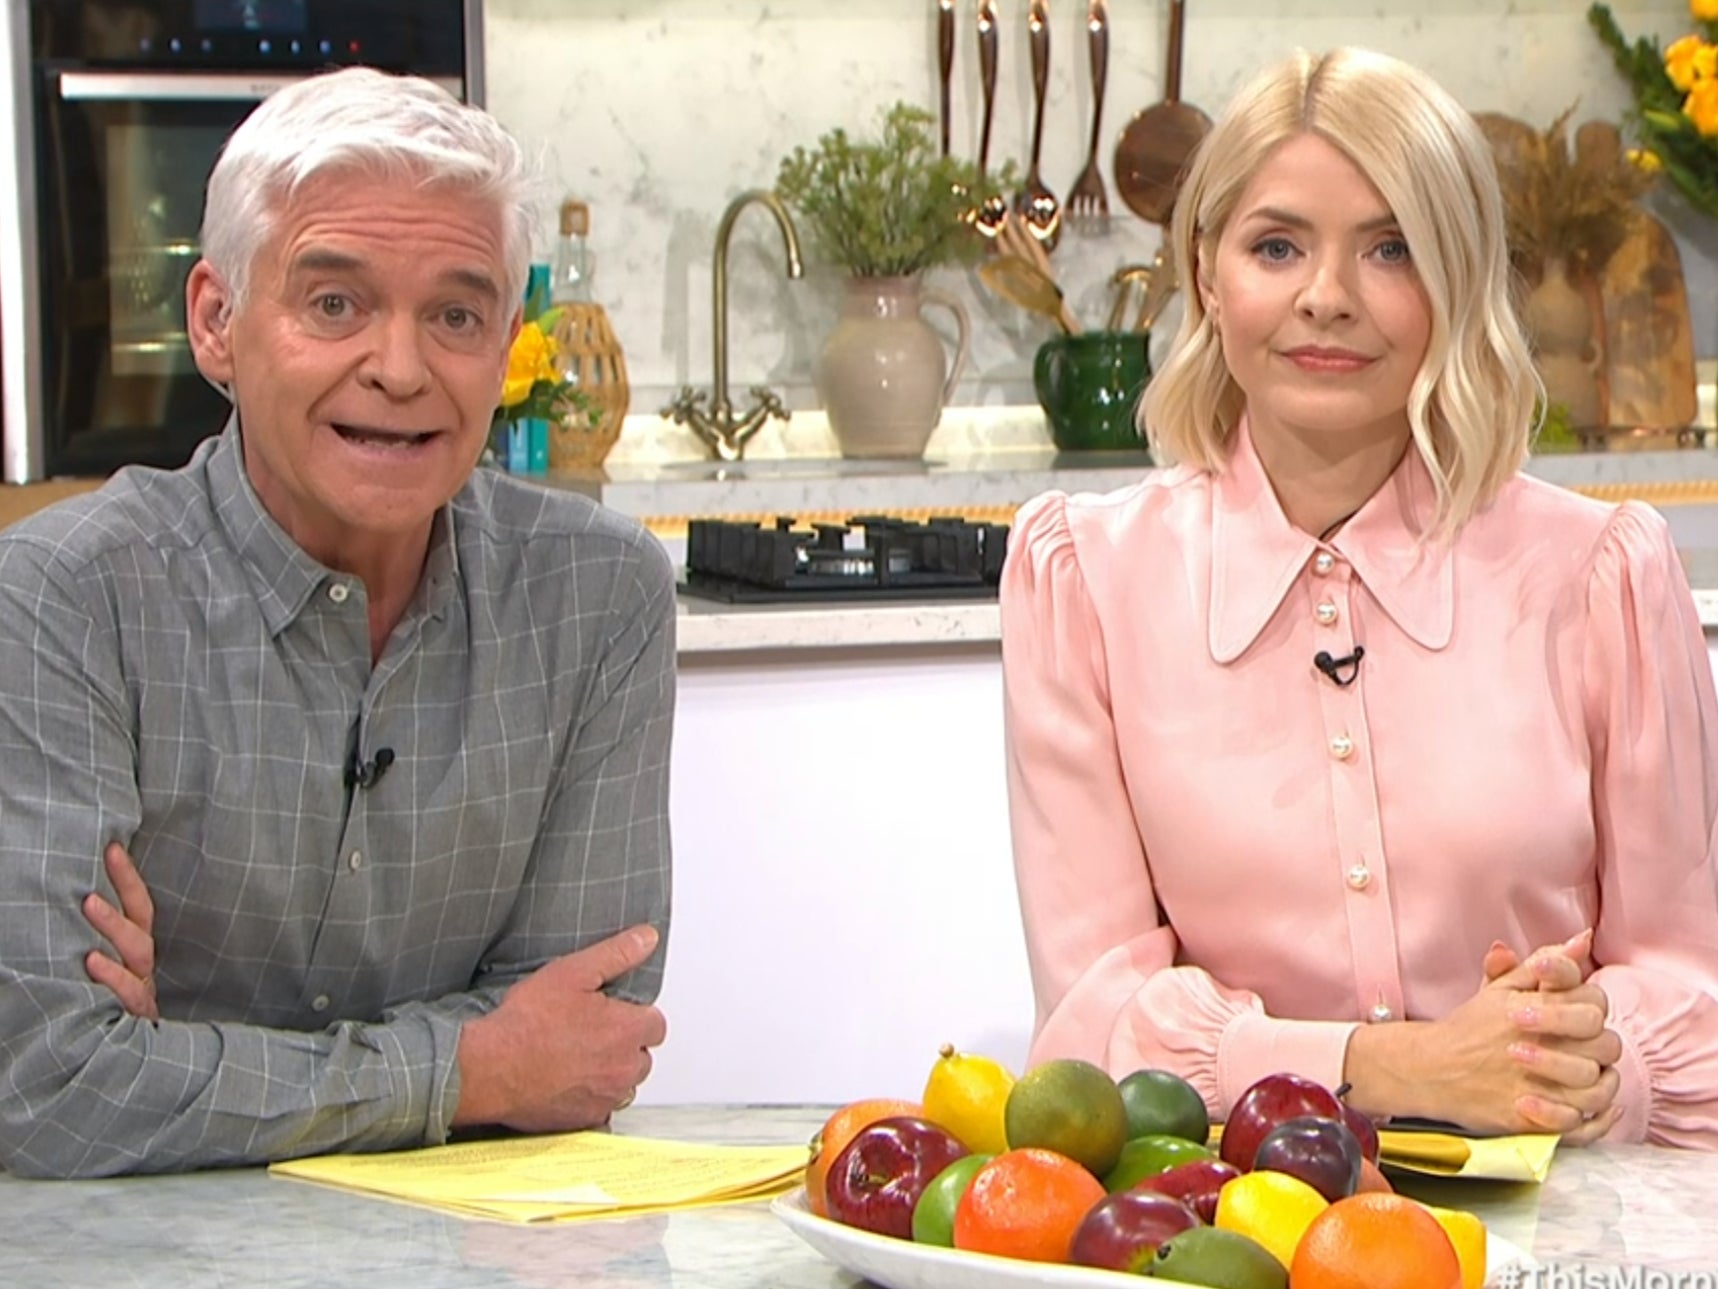 Schofield and Willoughby on ‘This Morning'